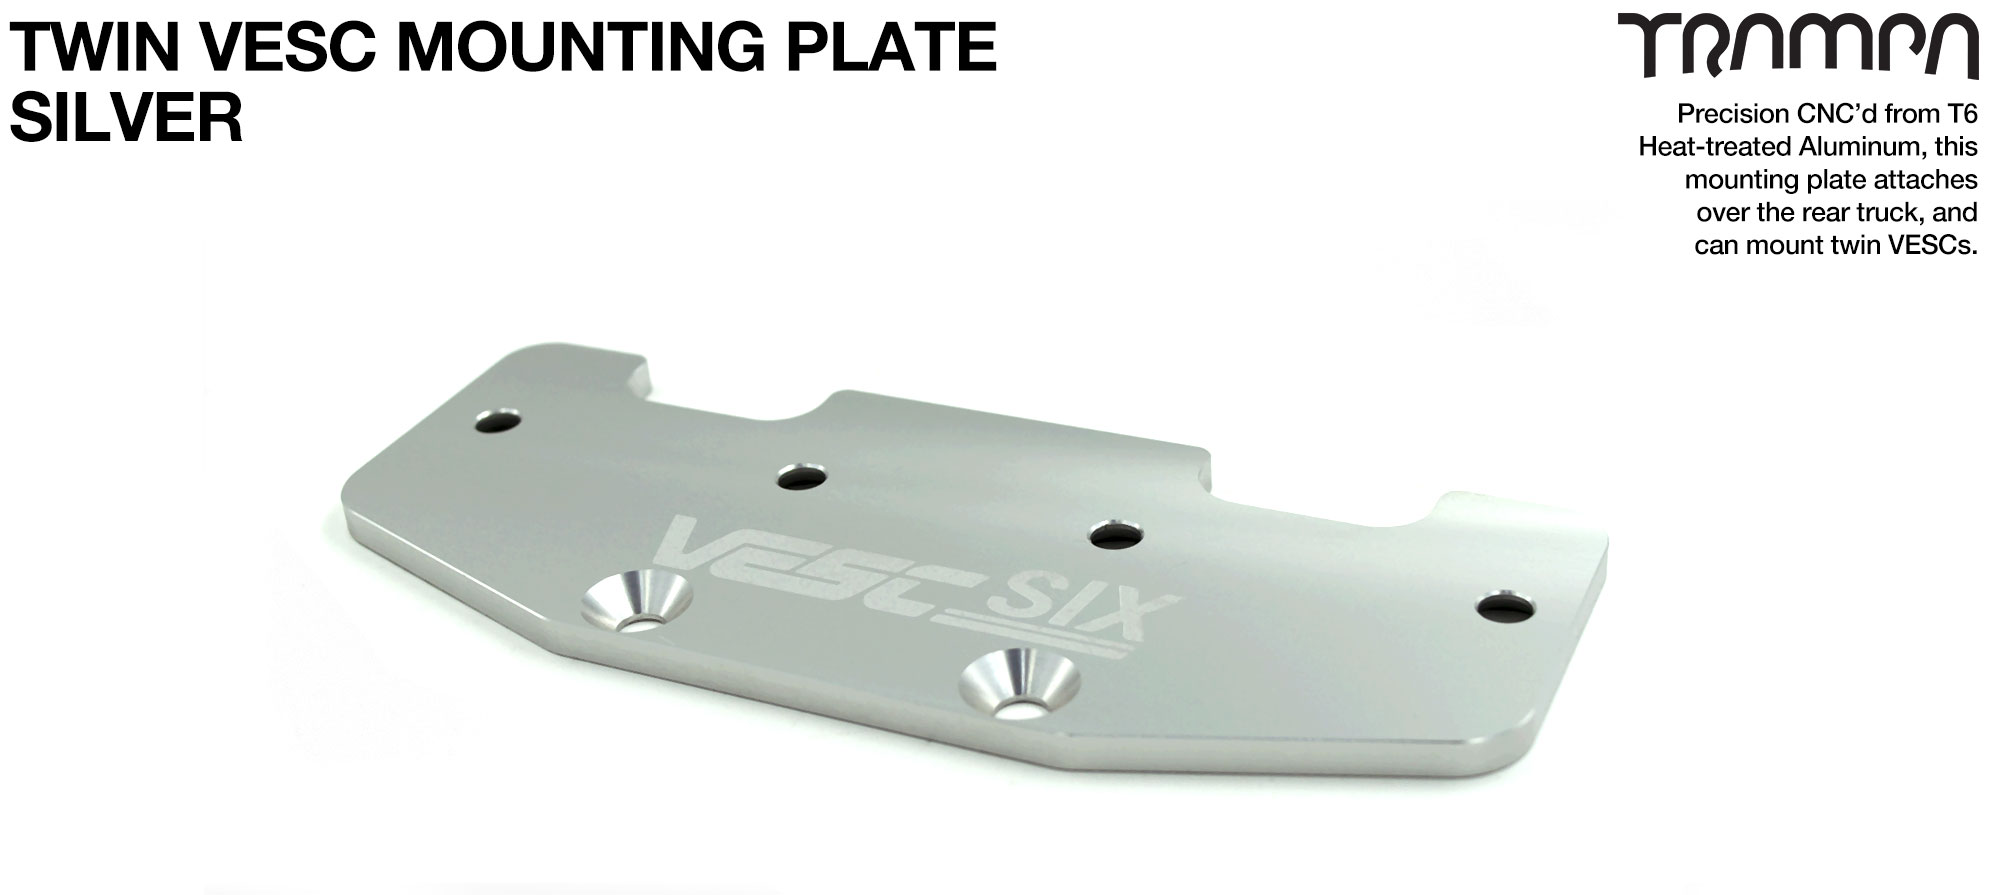 ALUMINIUM mounting Plate for TWIN VESC 6 - Anodised SILVER 